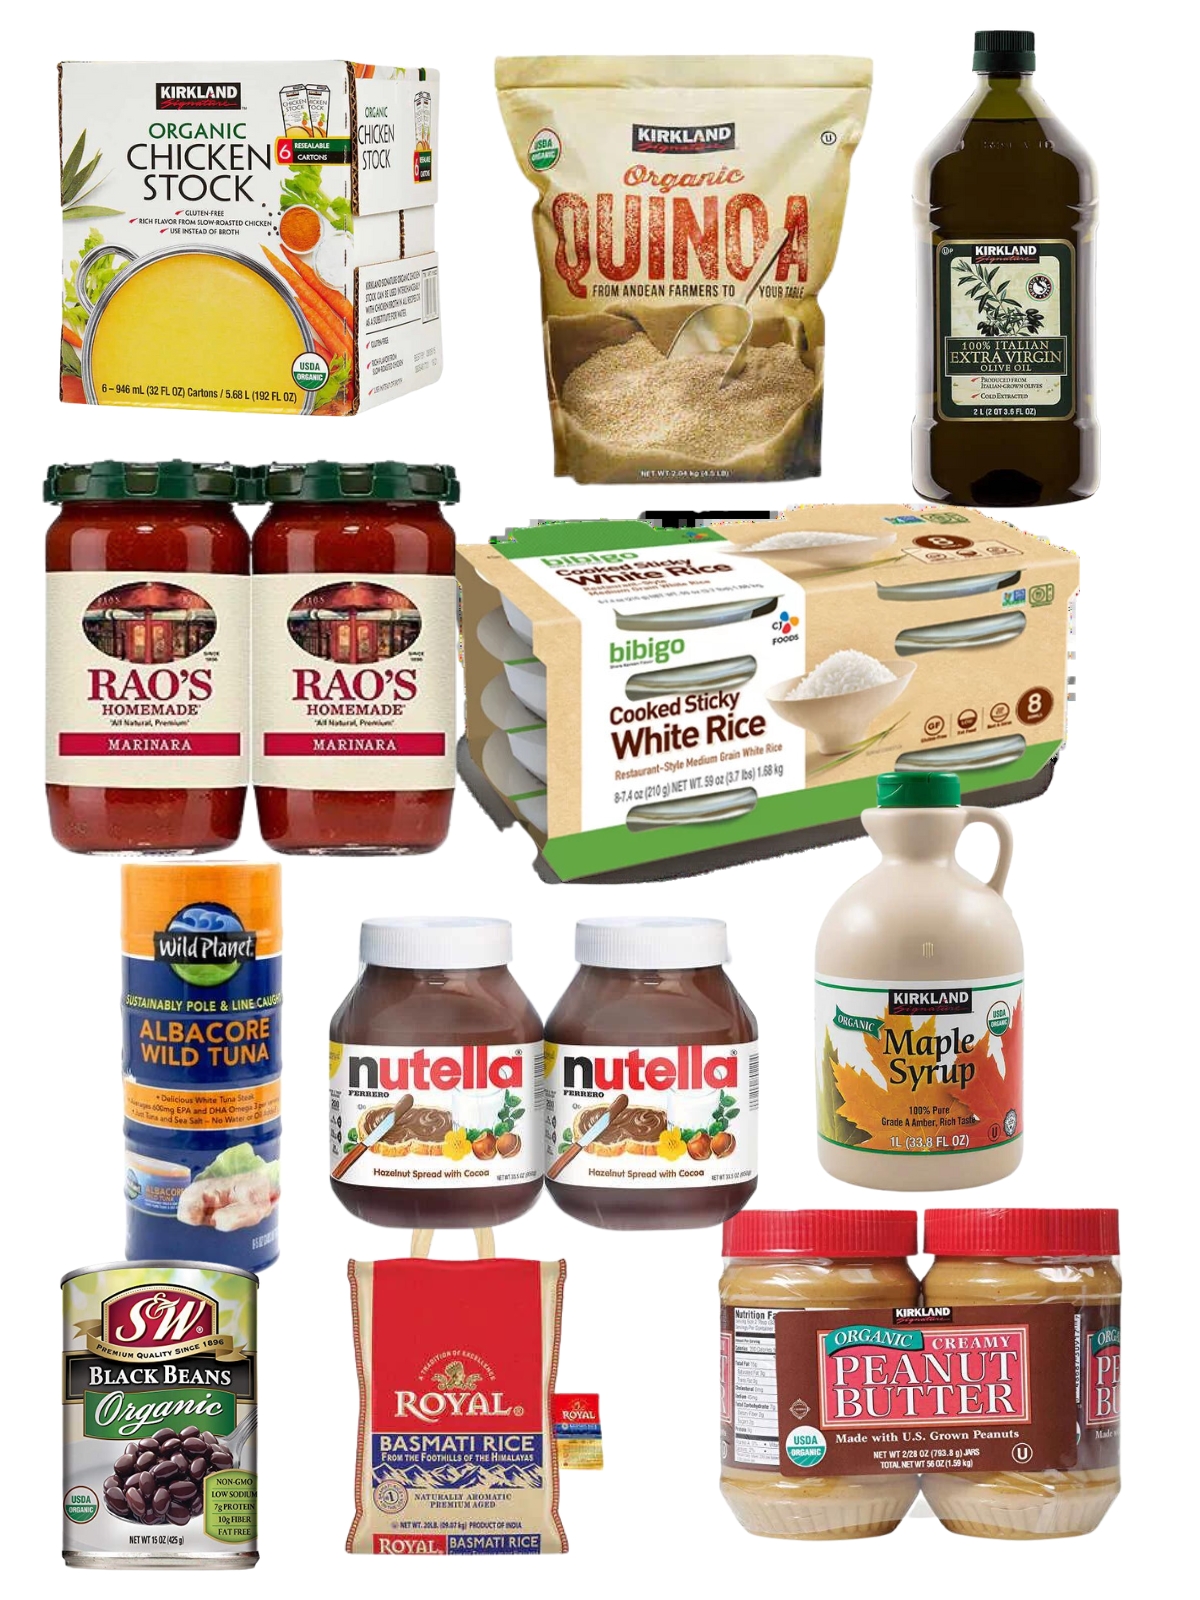 images of pantry dry goods that can be found at Costco